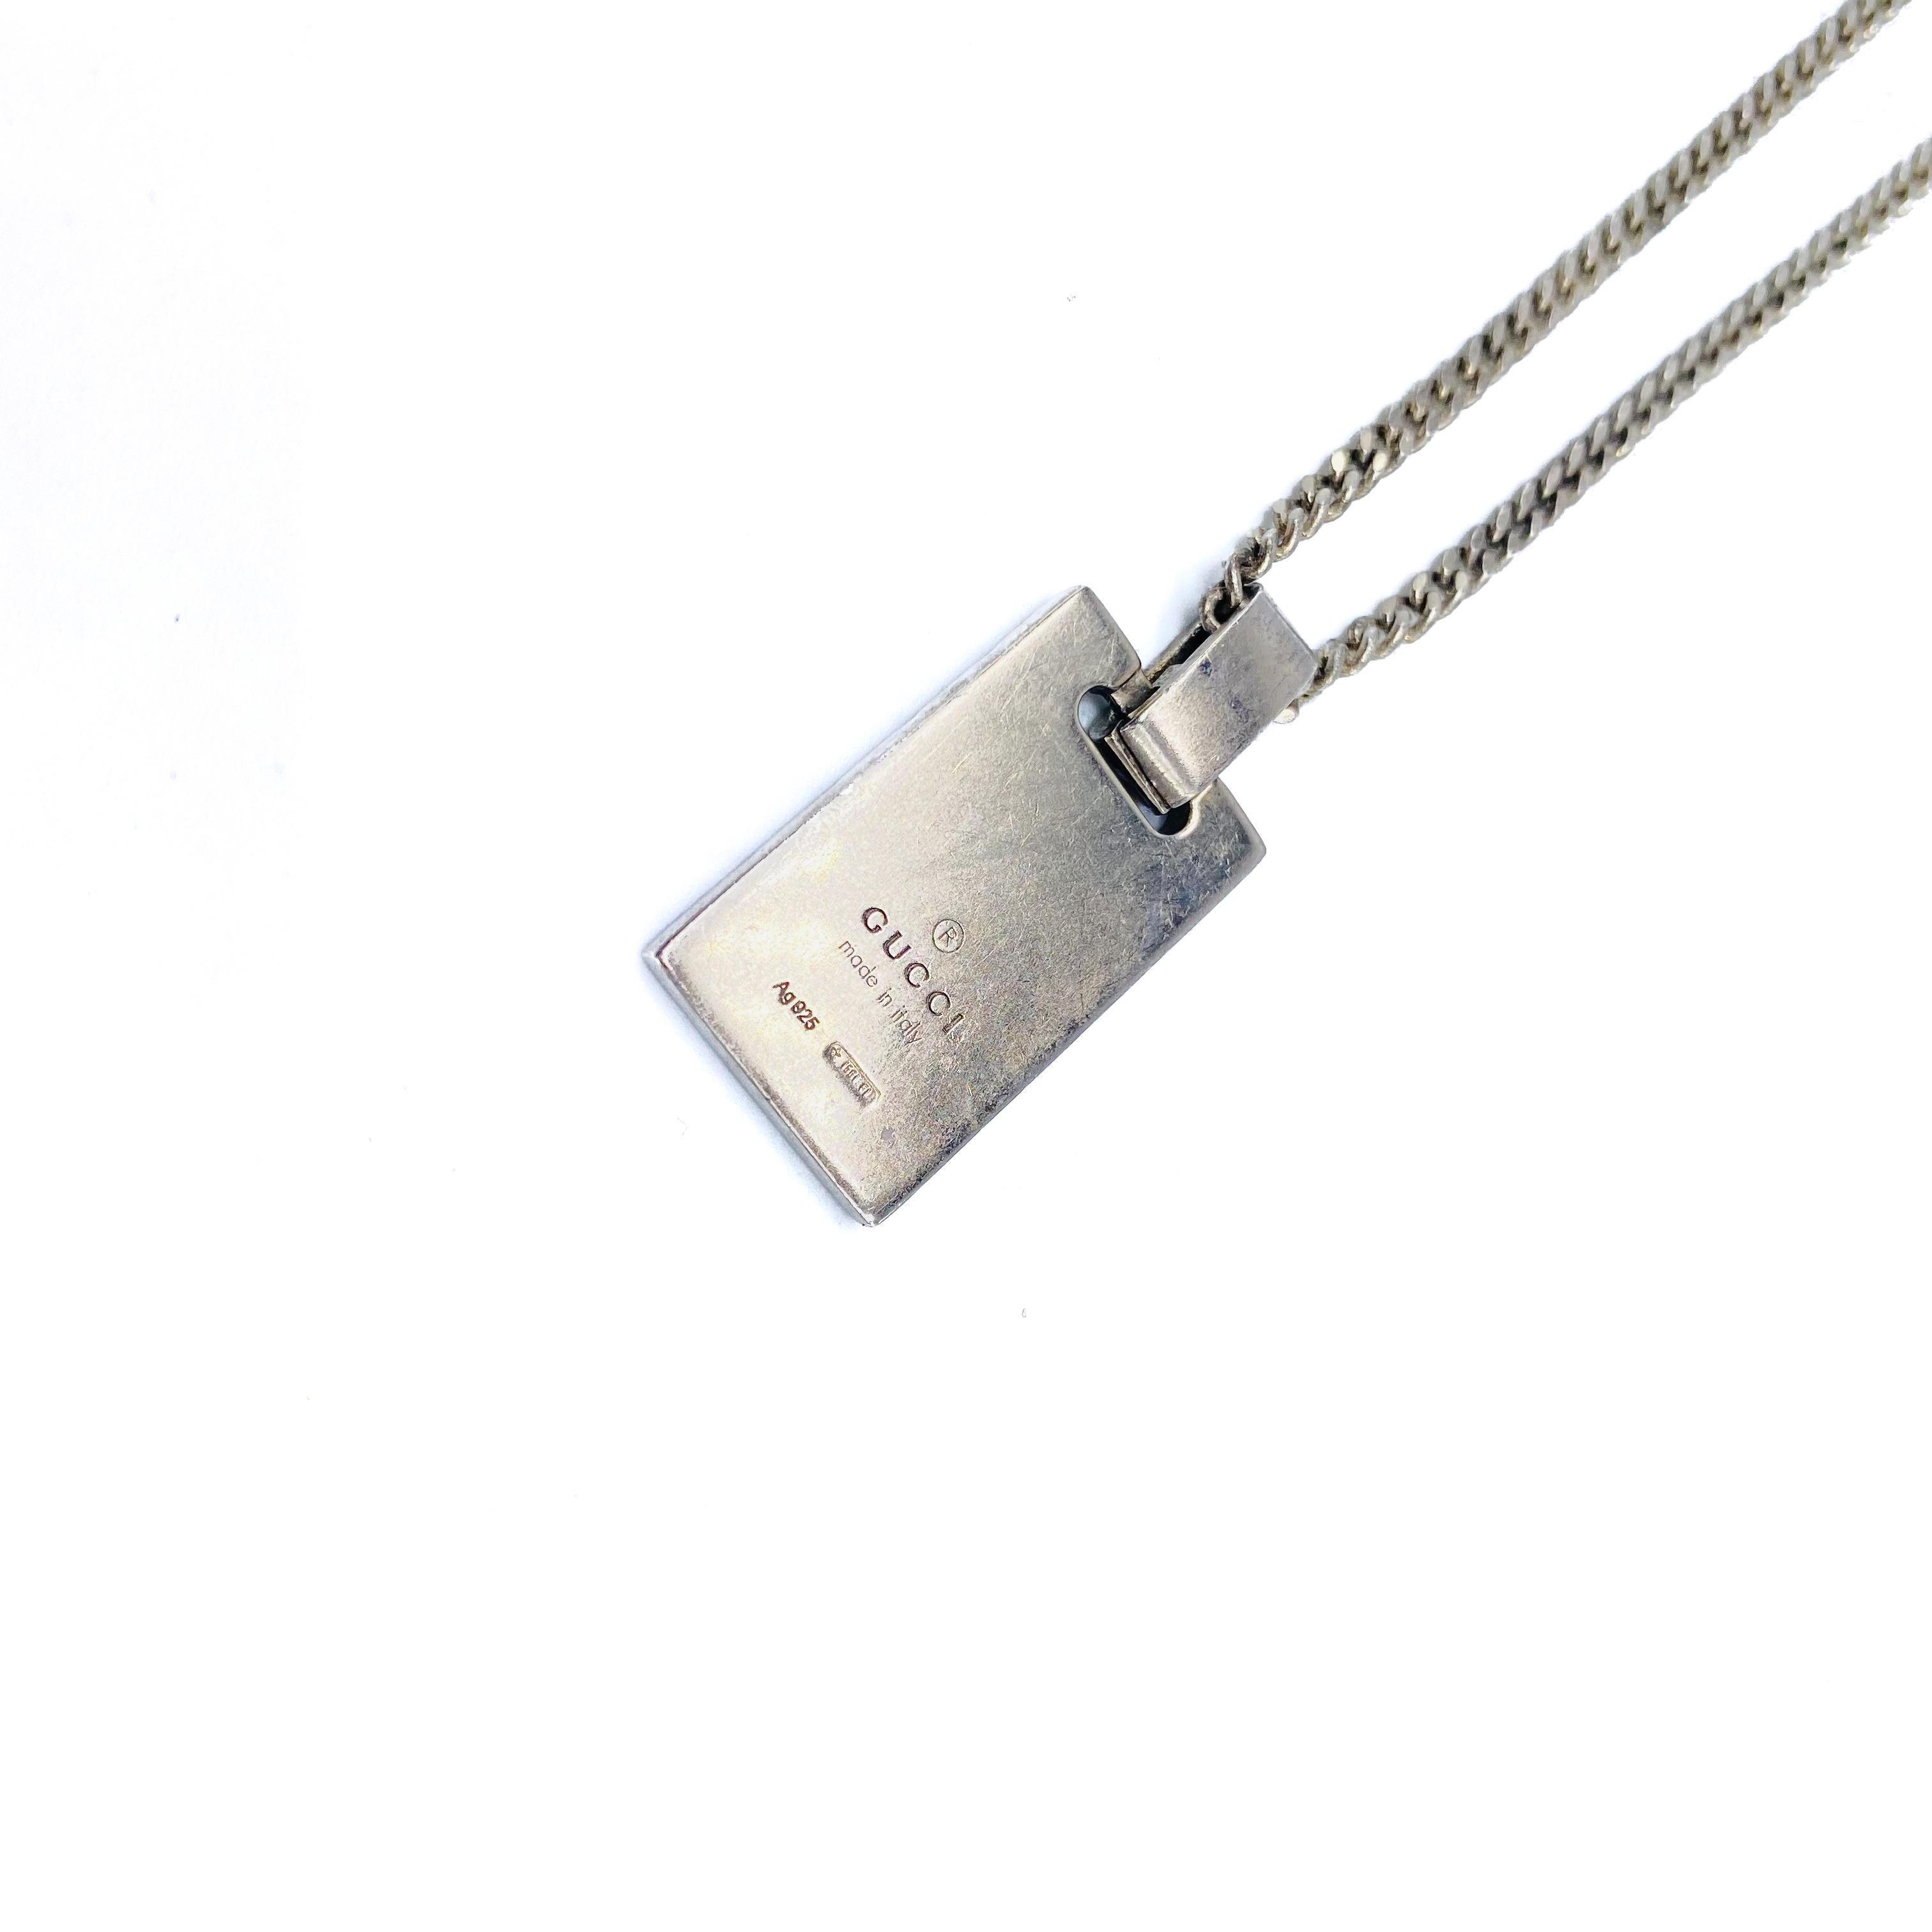 Gucci Vintage 1990s Silver Pendant Necklace

Super cool pendant from the Gucci 1990s archive

Detail
-Made in Italy in the 1990s
-Crafted from sterling silver
-Fine curb chain
-Small rectangular pendant featuring the iconic Gucci logo and